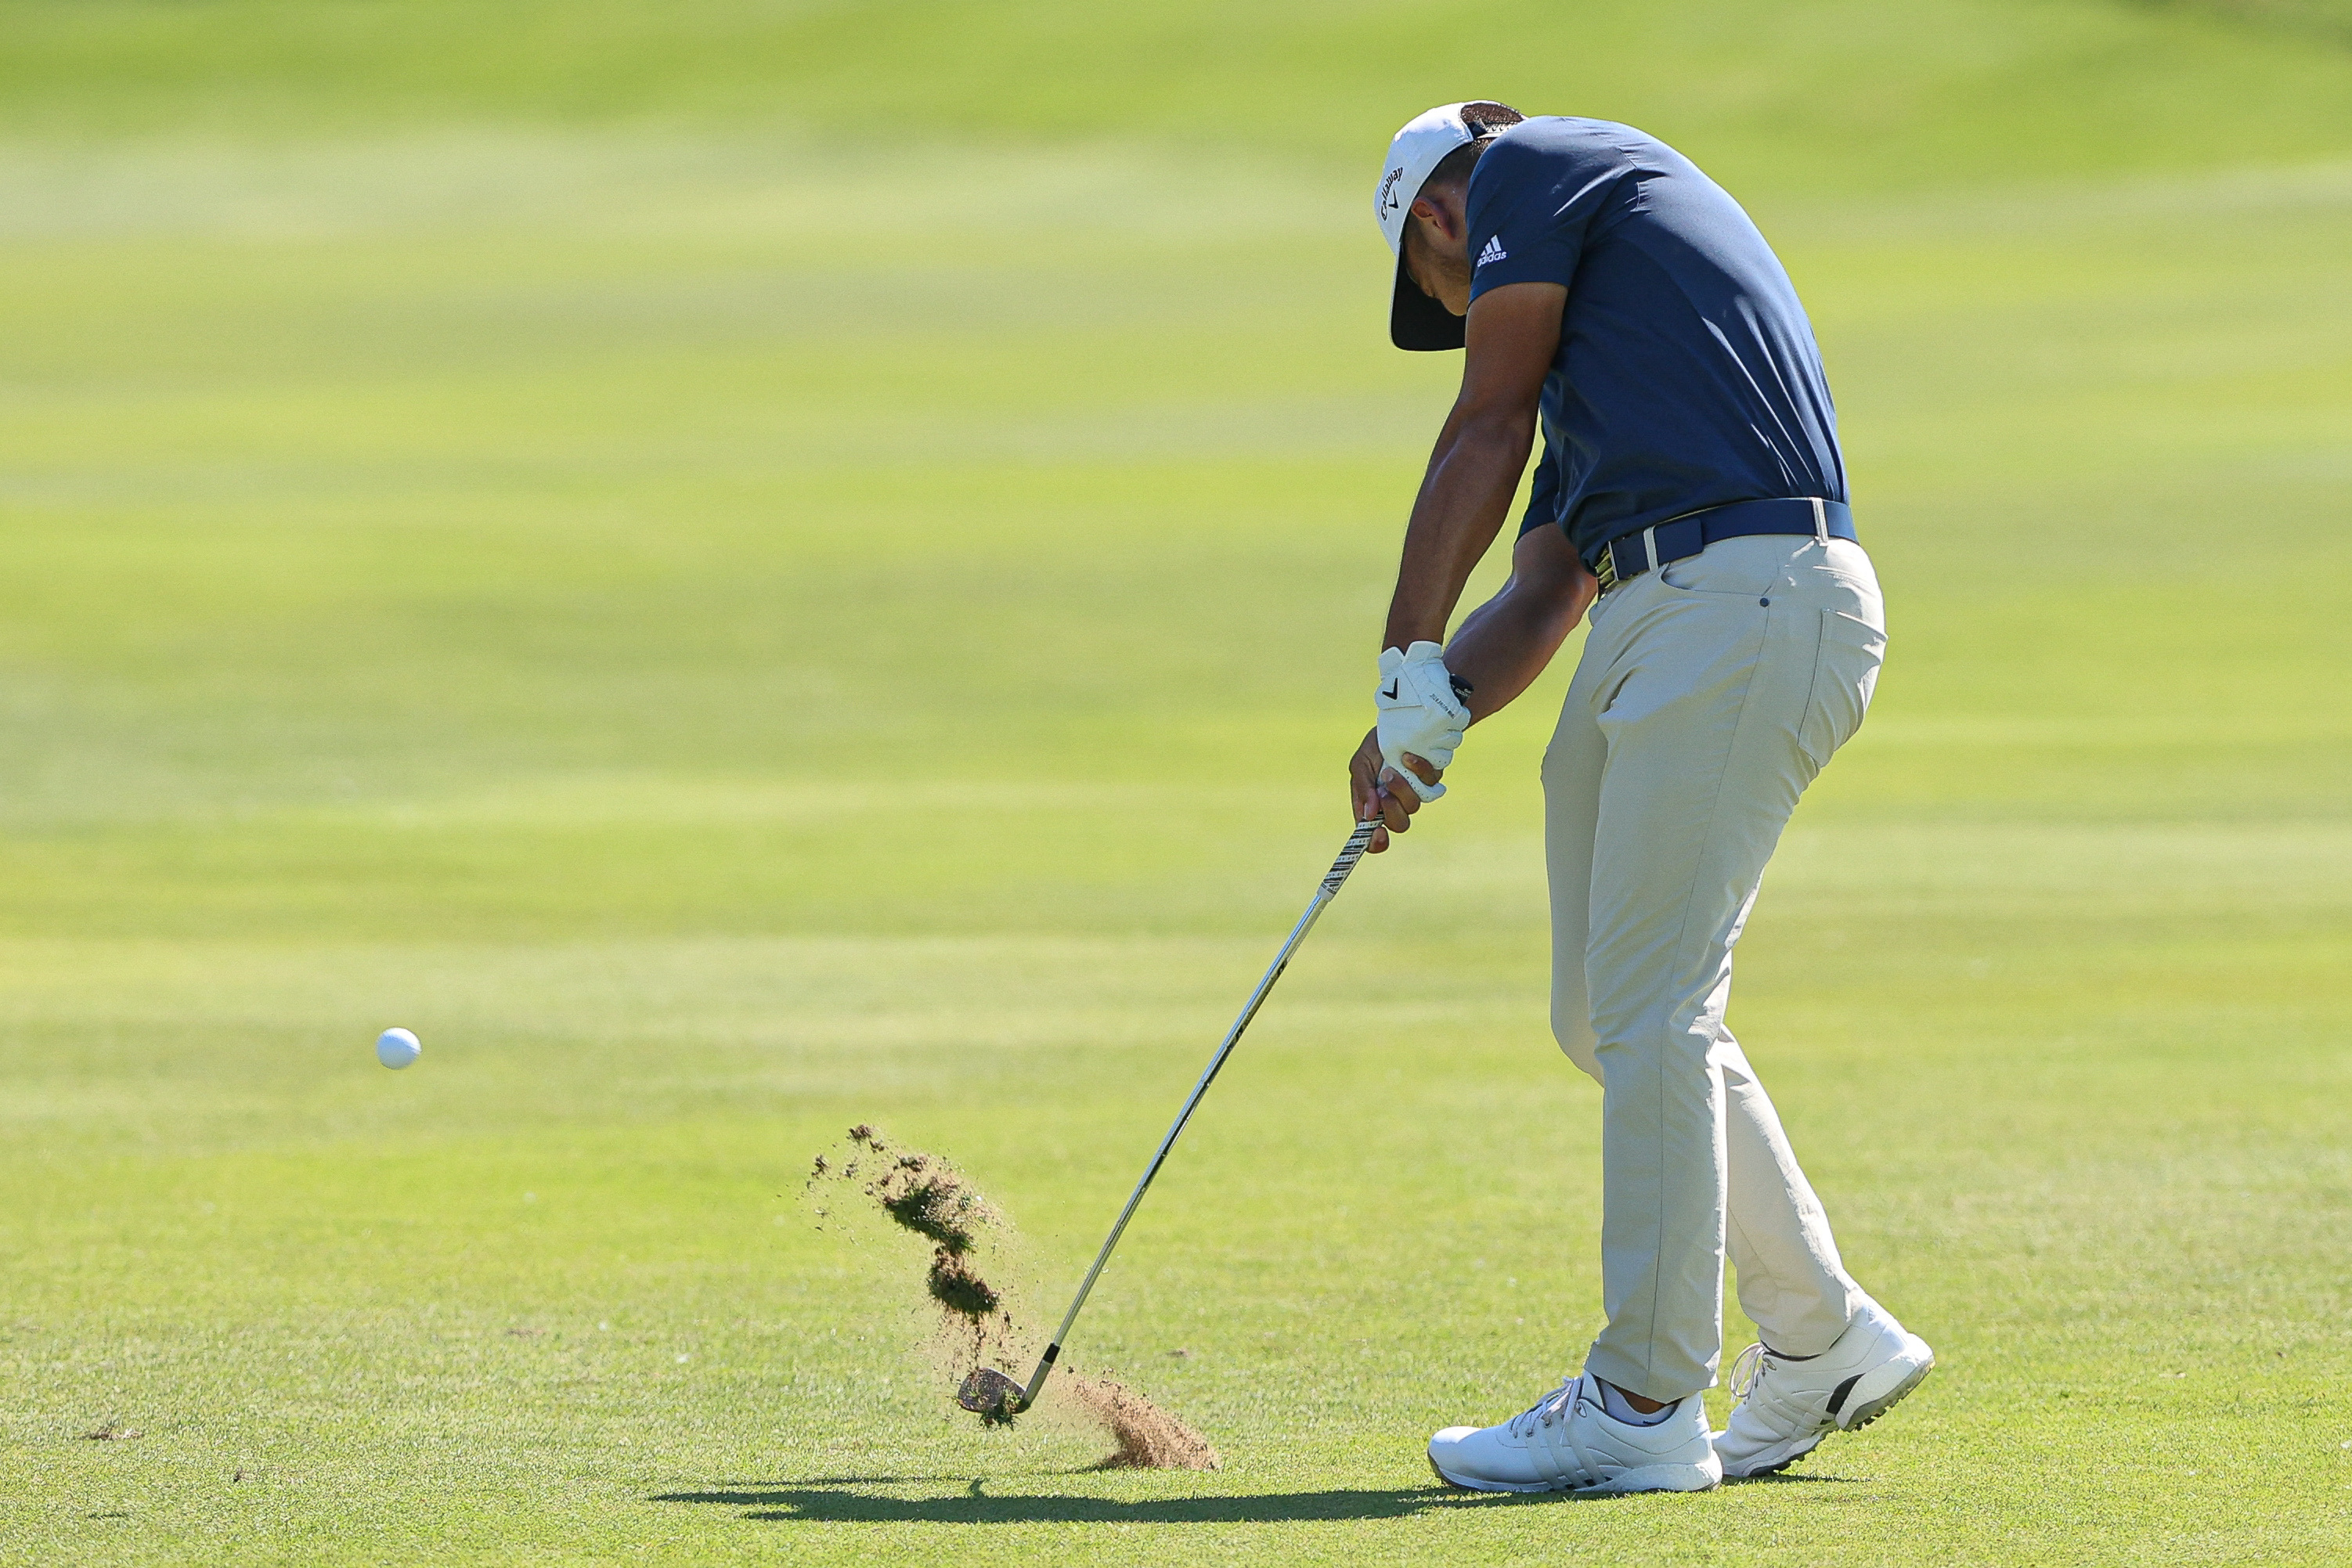 Jun 25, 2022; Cromwell, Connecticut, USA; Xander Schauffele plays a shot from the fairway of the ninth hole during the third round of the Travelers Championship golf tournament. Mandatory Credit: Vincent Carchietta-USA TODAY Sports